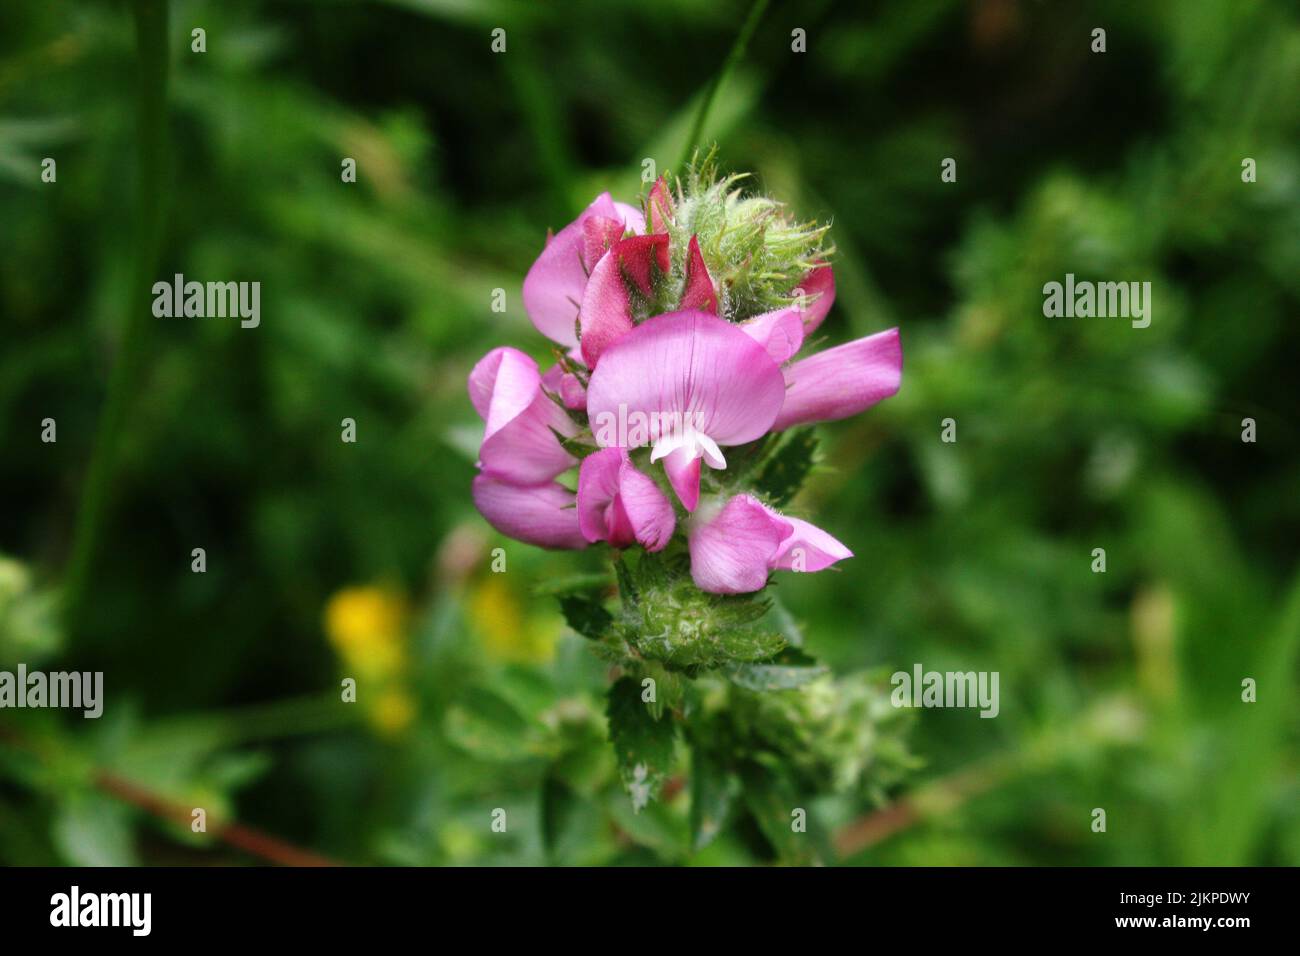 Tender pink flower of restharrow (Ononis arvensis) close up Stock Photo